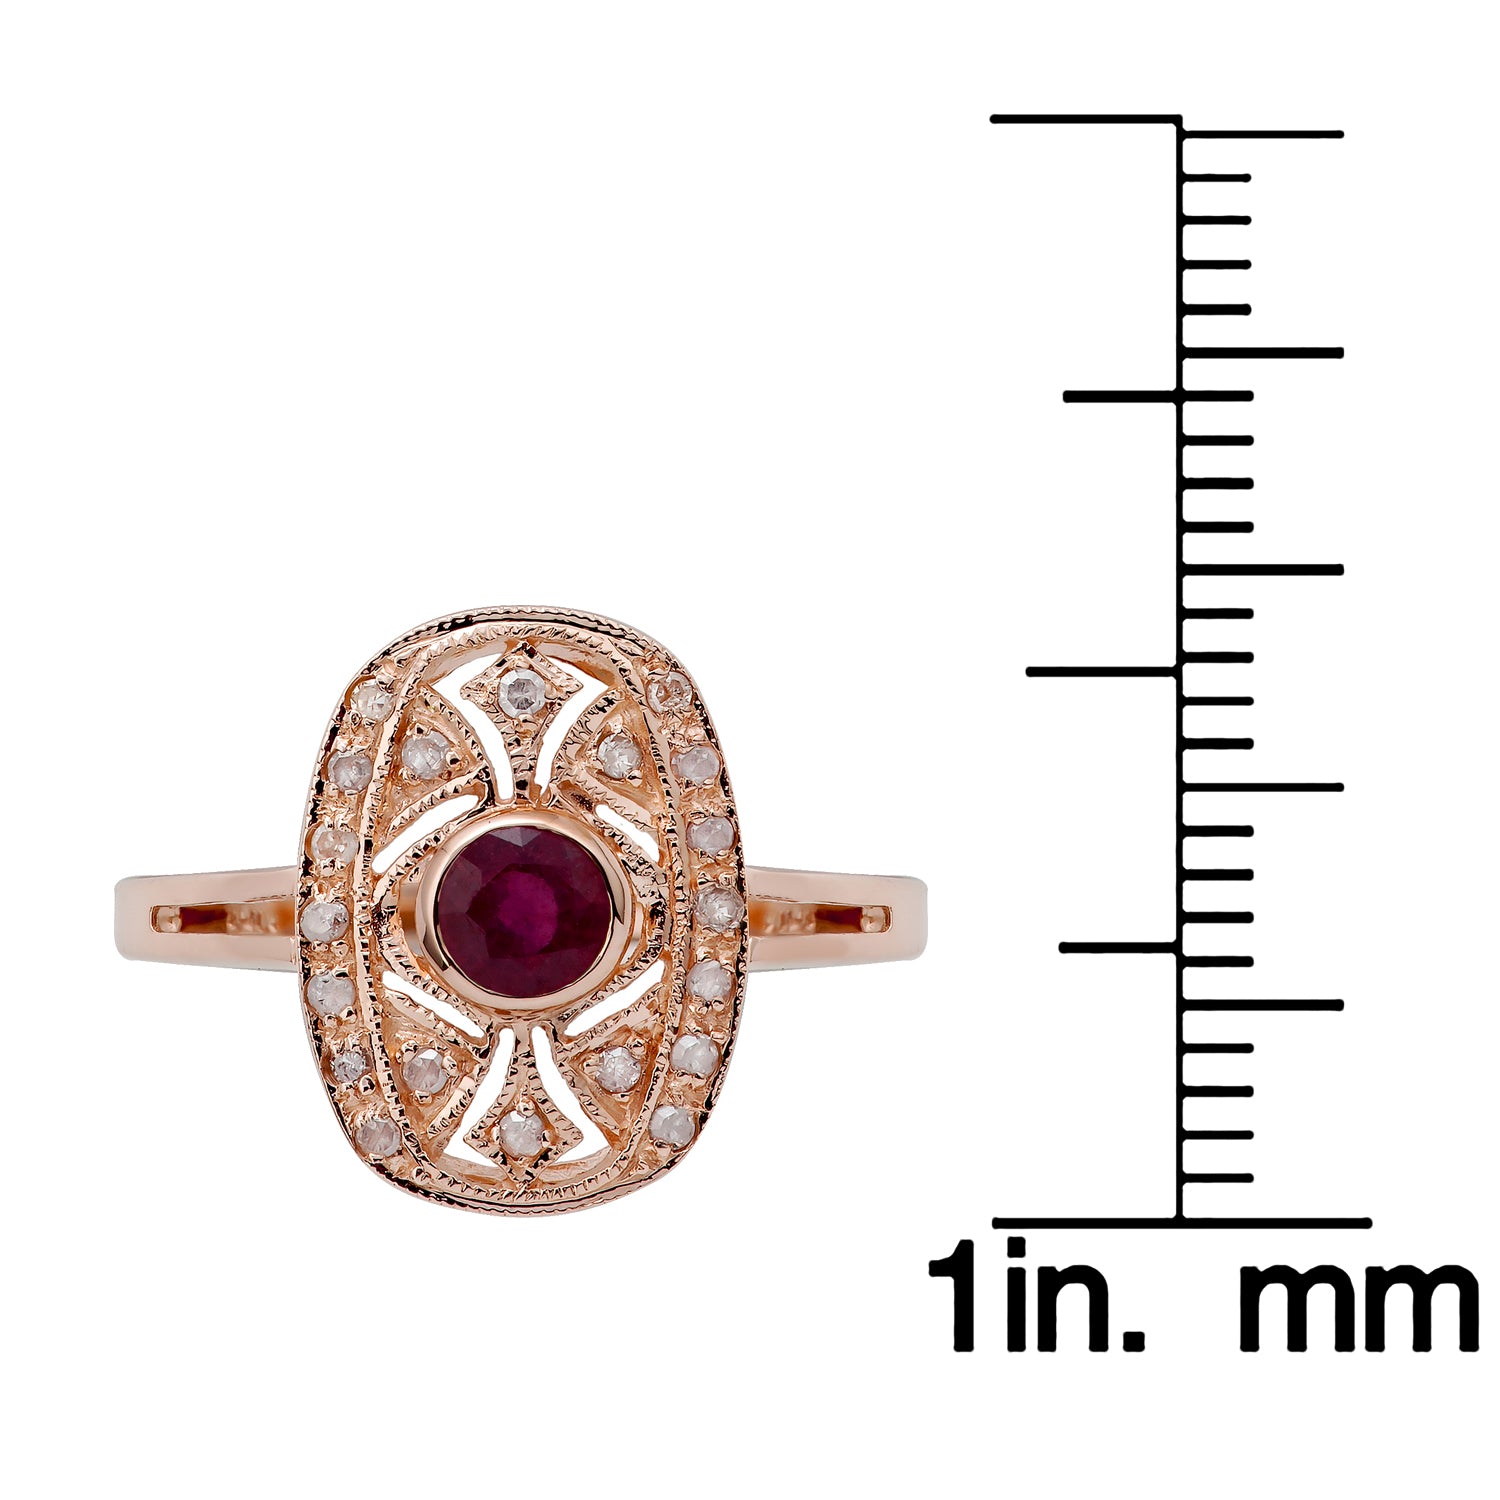 10k Rose Gold Vintage Style Genuine Round Ruby and Diamond Ring